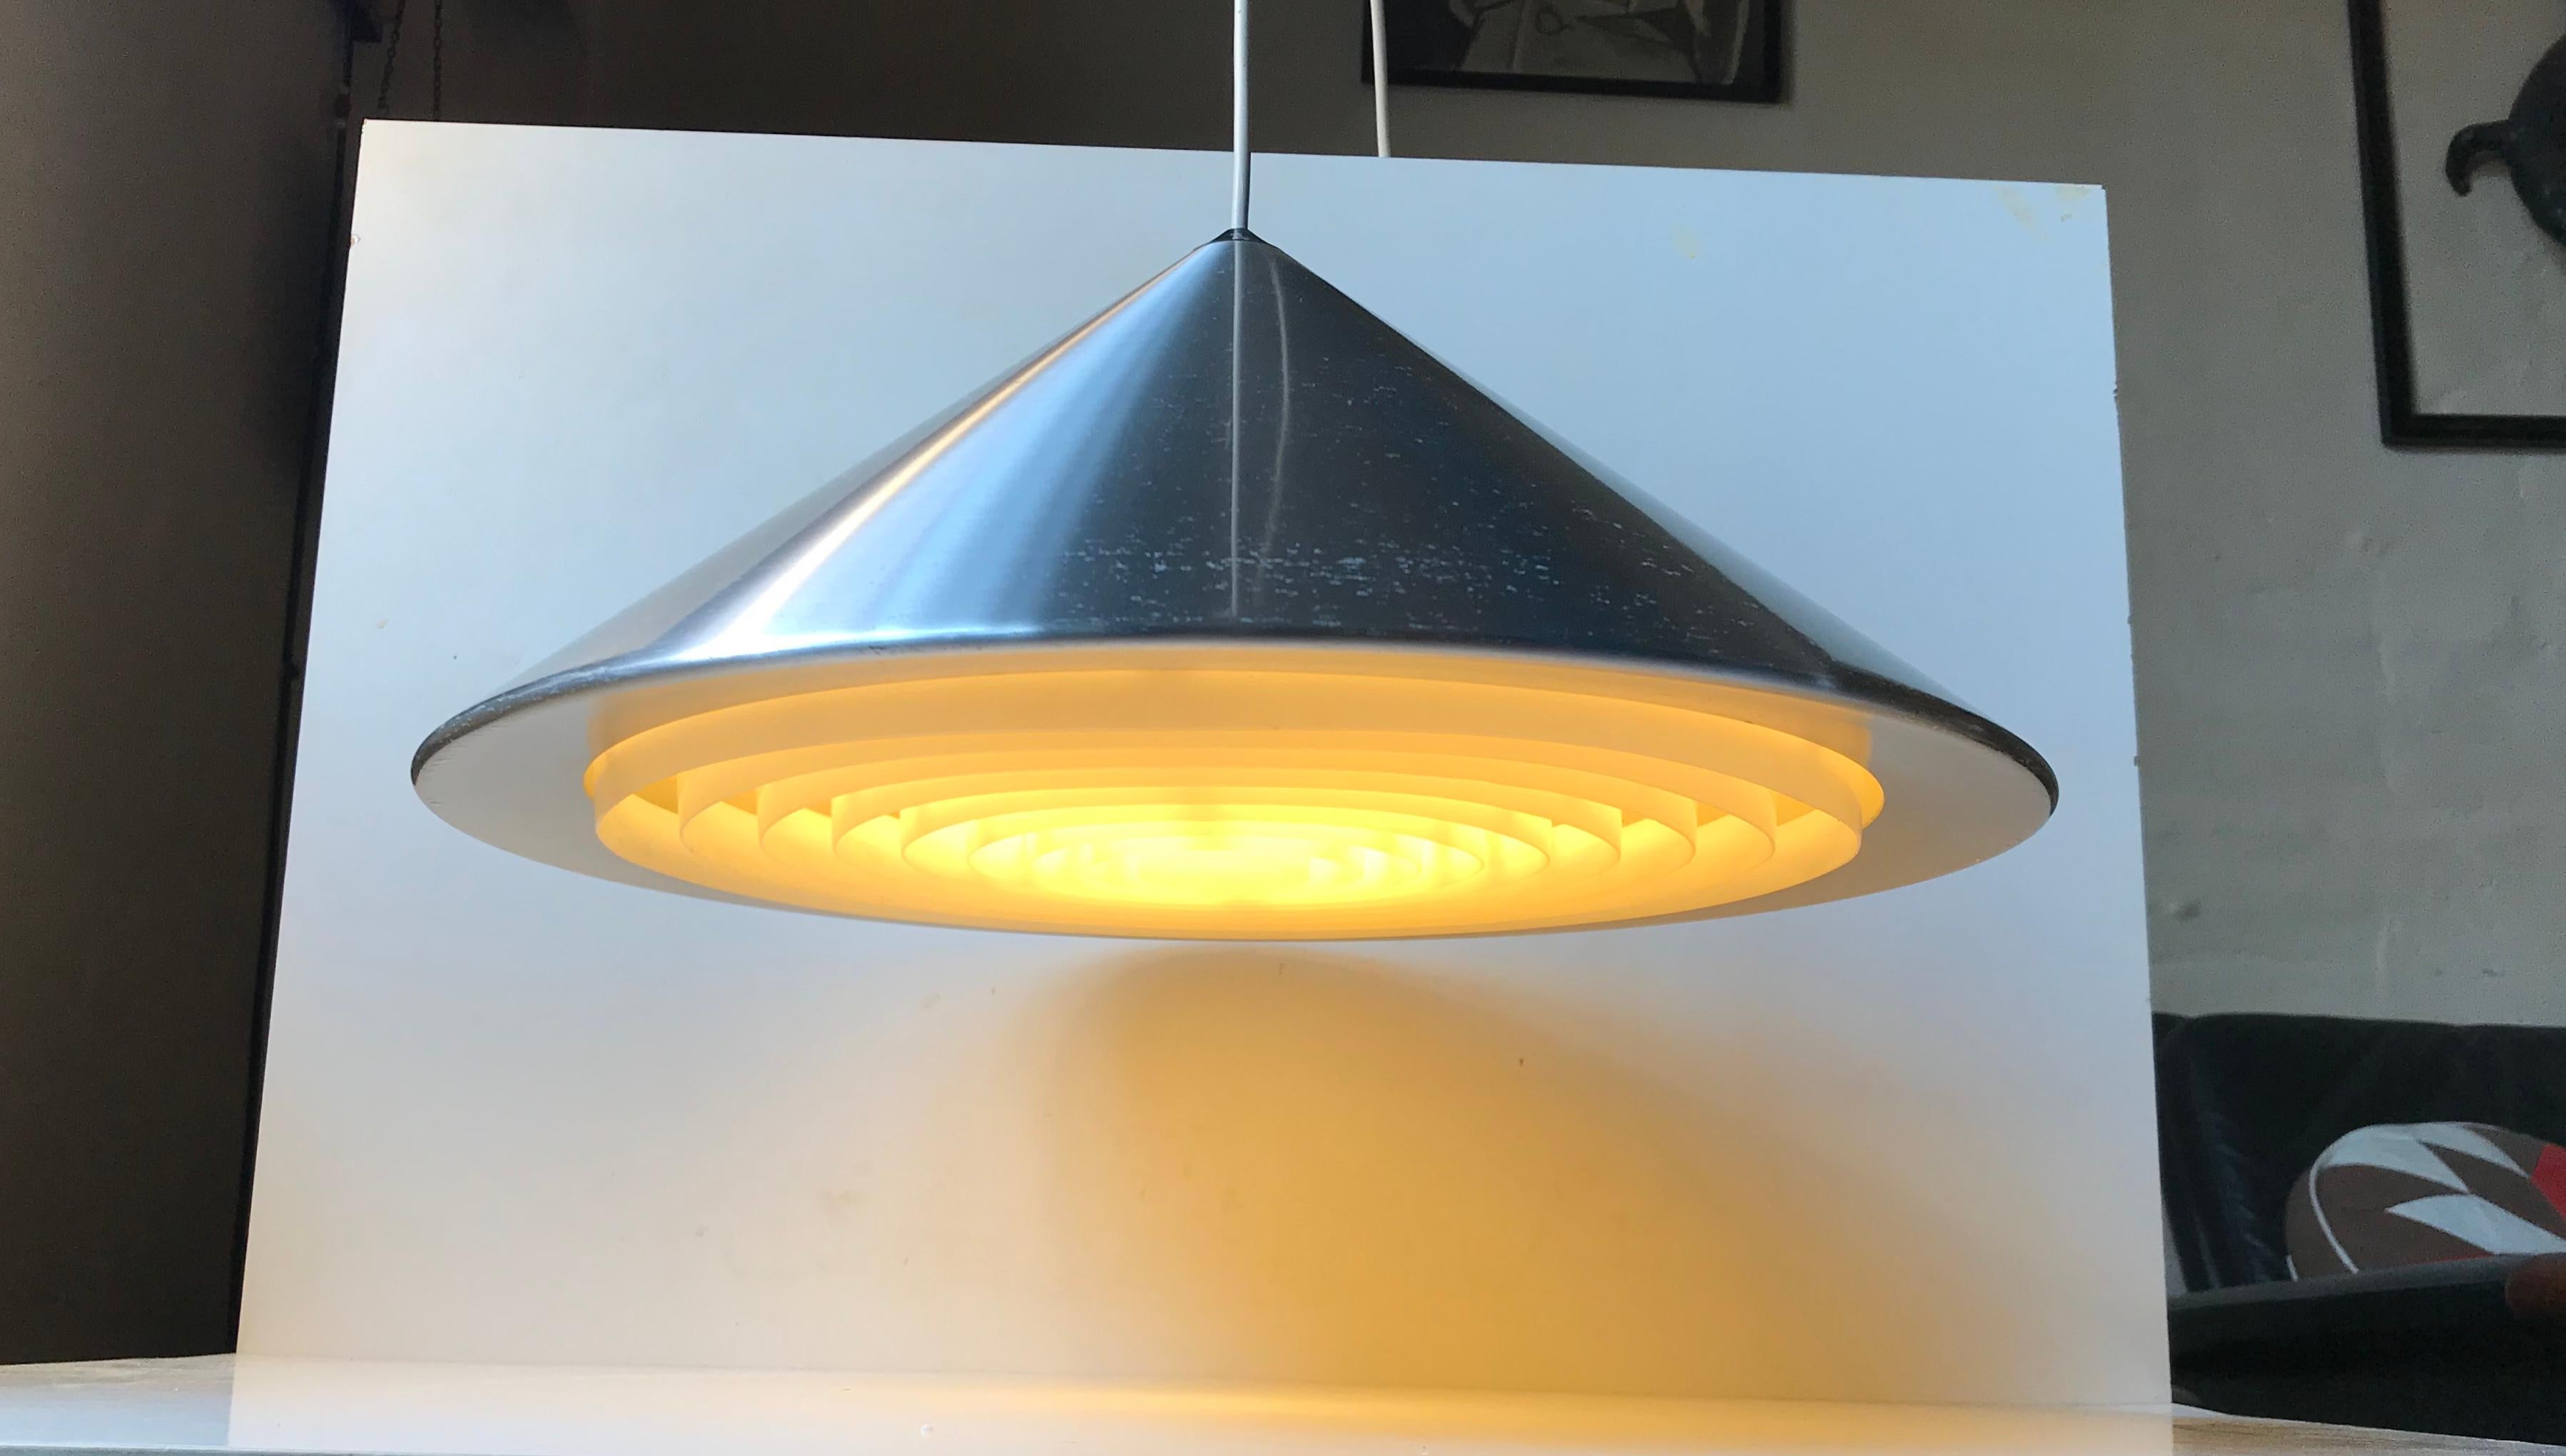 Large conical pendant lamp made from brushed aluminium set with an acrylic shade that distributes and soften the light. Its called 'Classic' and was designed by Jo Hammerborg and manufactured by Fog & Morup in Denmark during the mid-late 1960s.
 